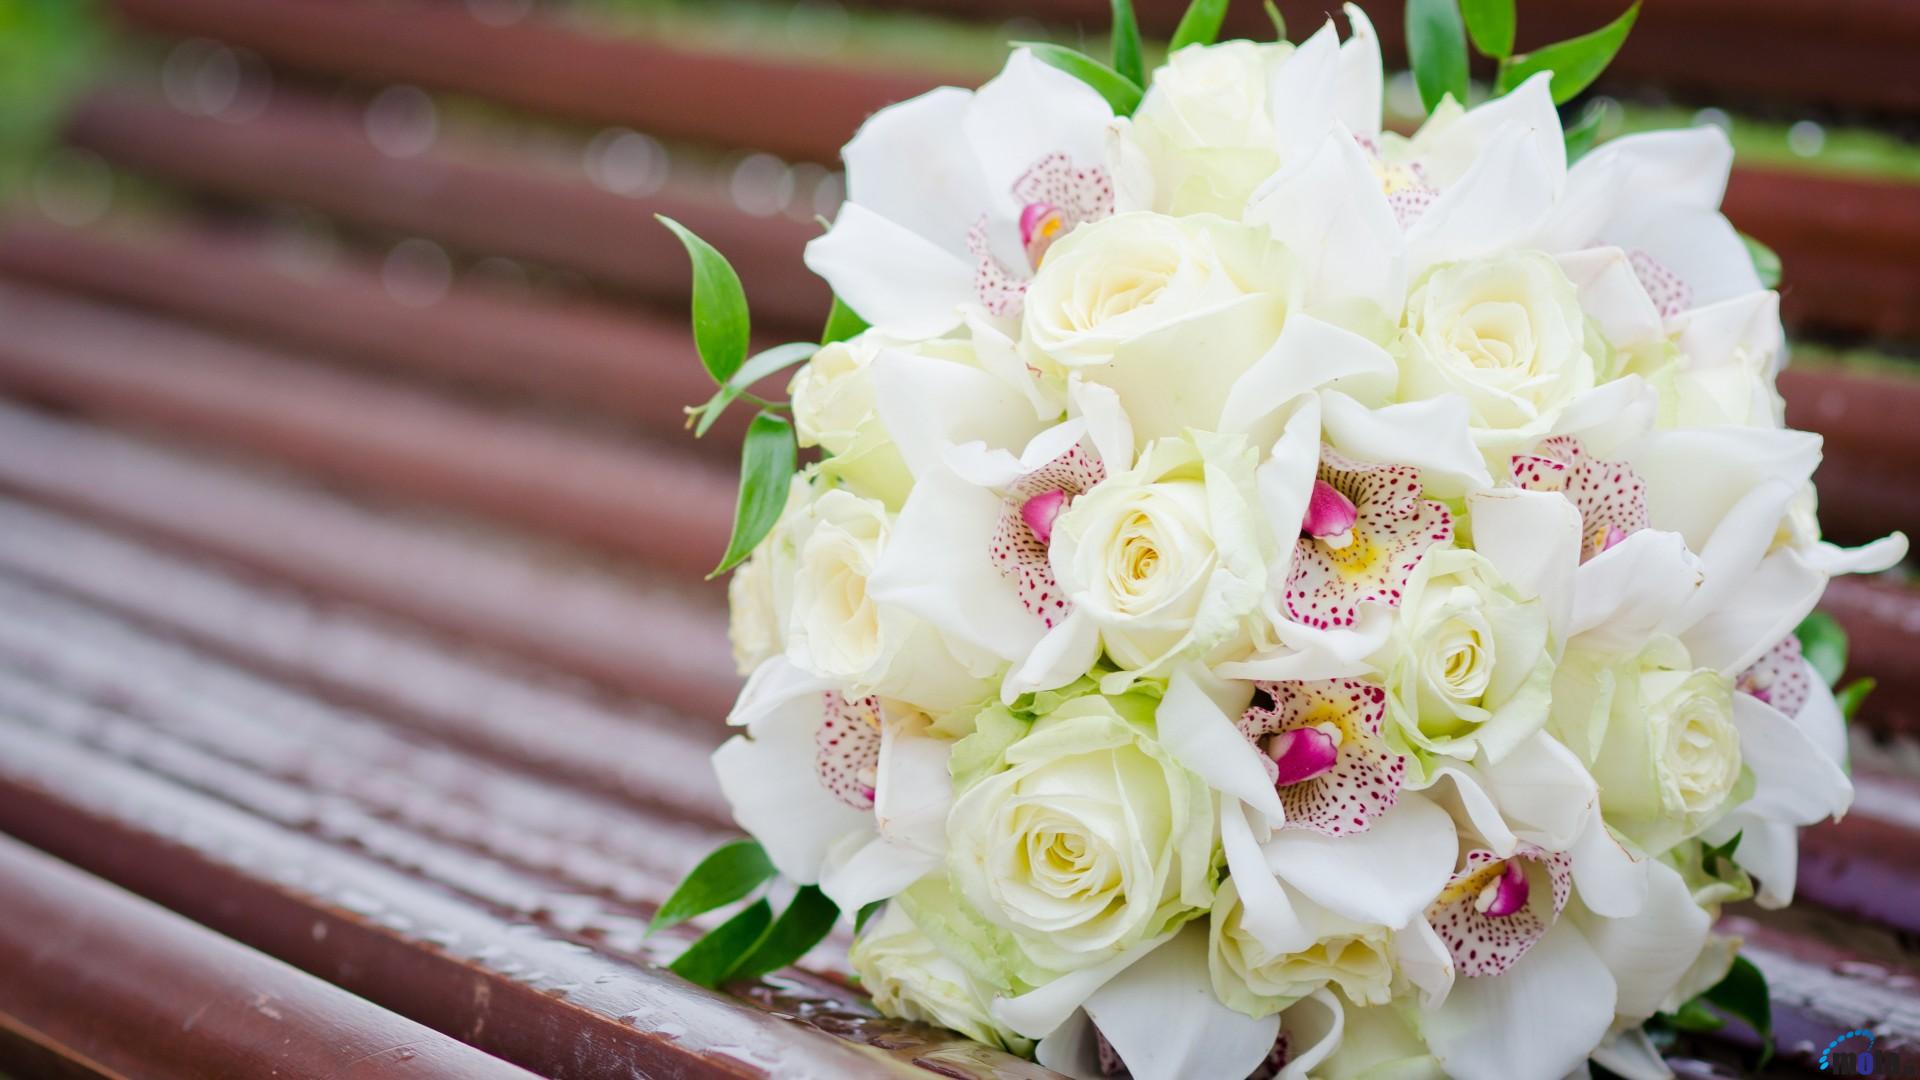 White roses and other flowers in a wedding bouquet ...